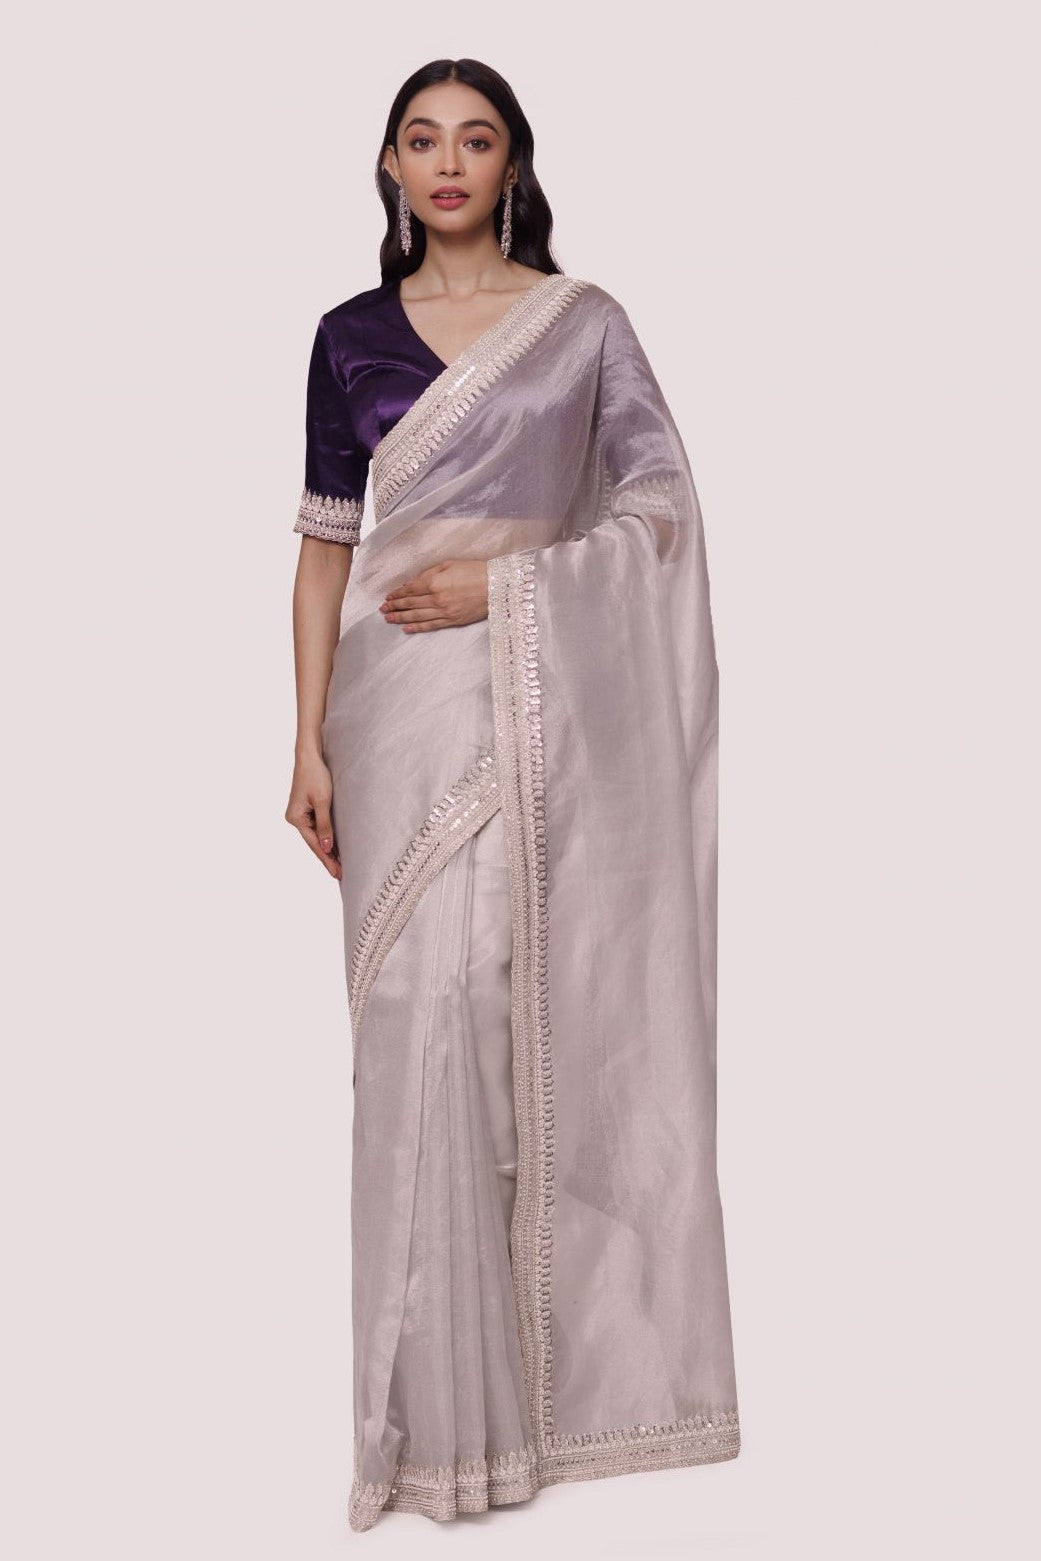 Jimichu Purple and Pink Simple Saree With Sequin Blouse, Glossy and Smooth  Silk, Ideal for Adding a Hint of Elegance to Your Ethnic Clothing - Etsy